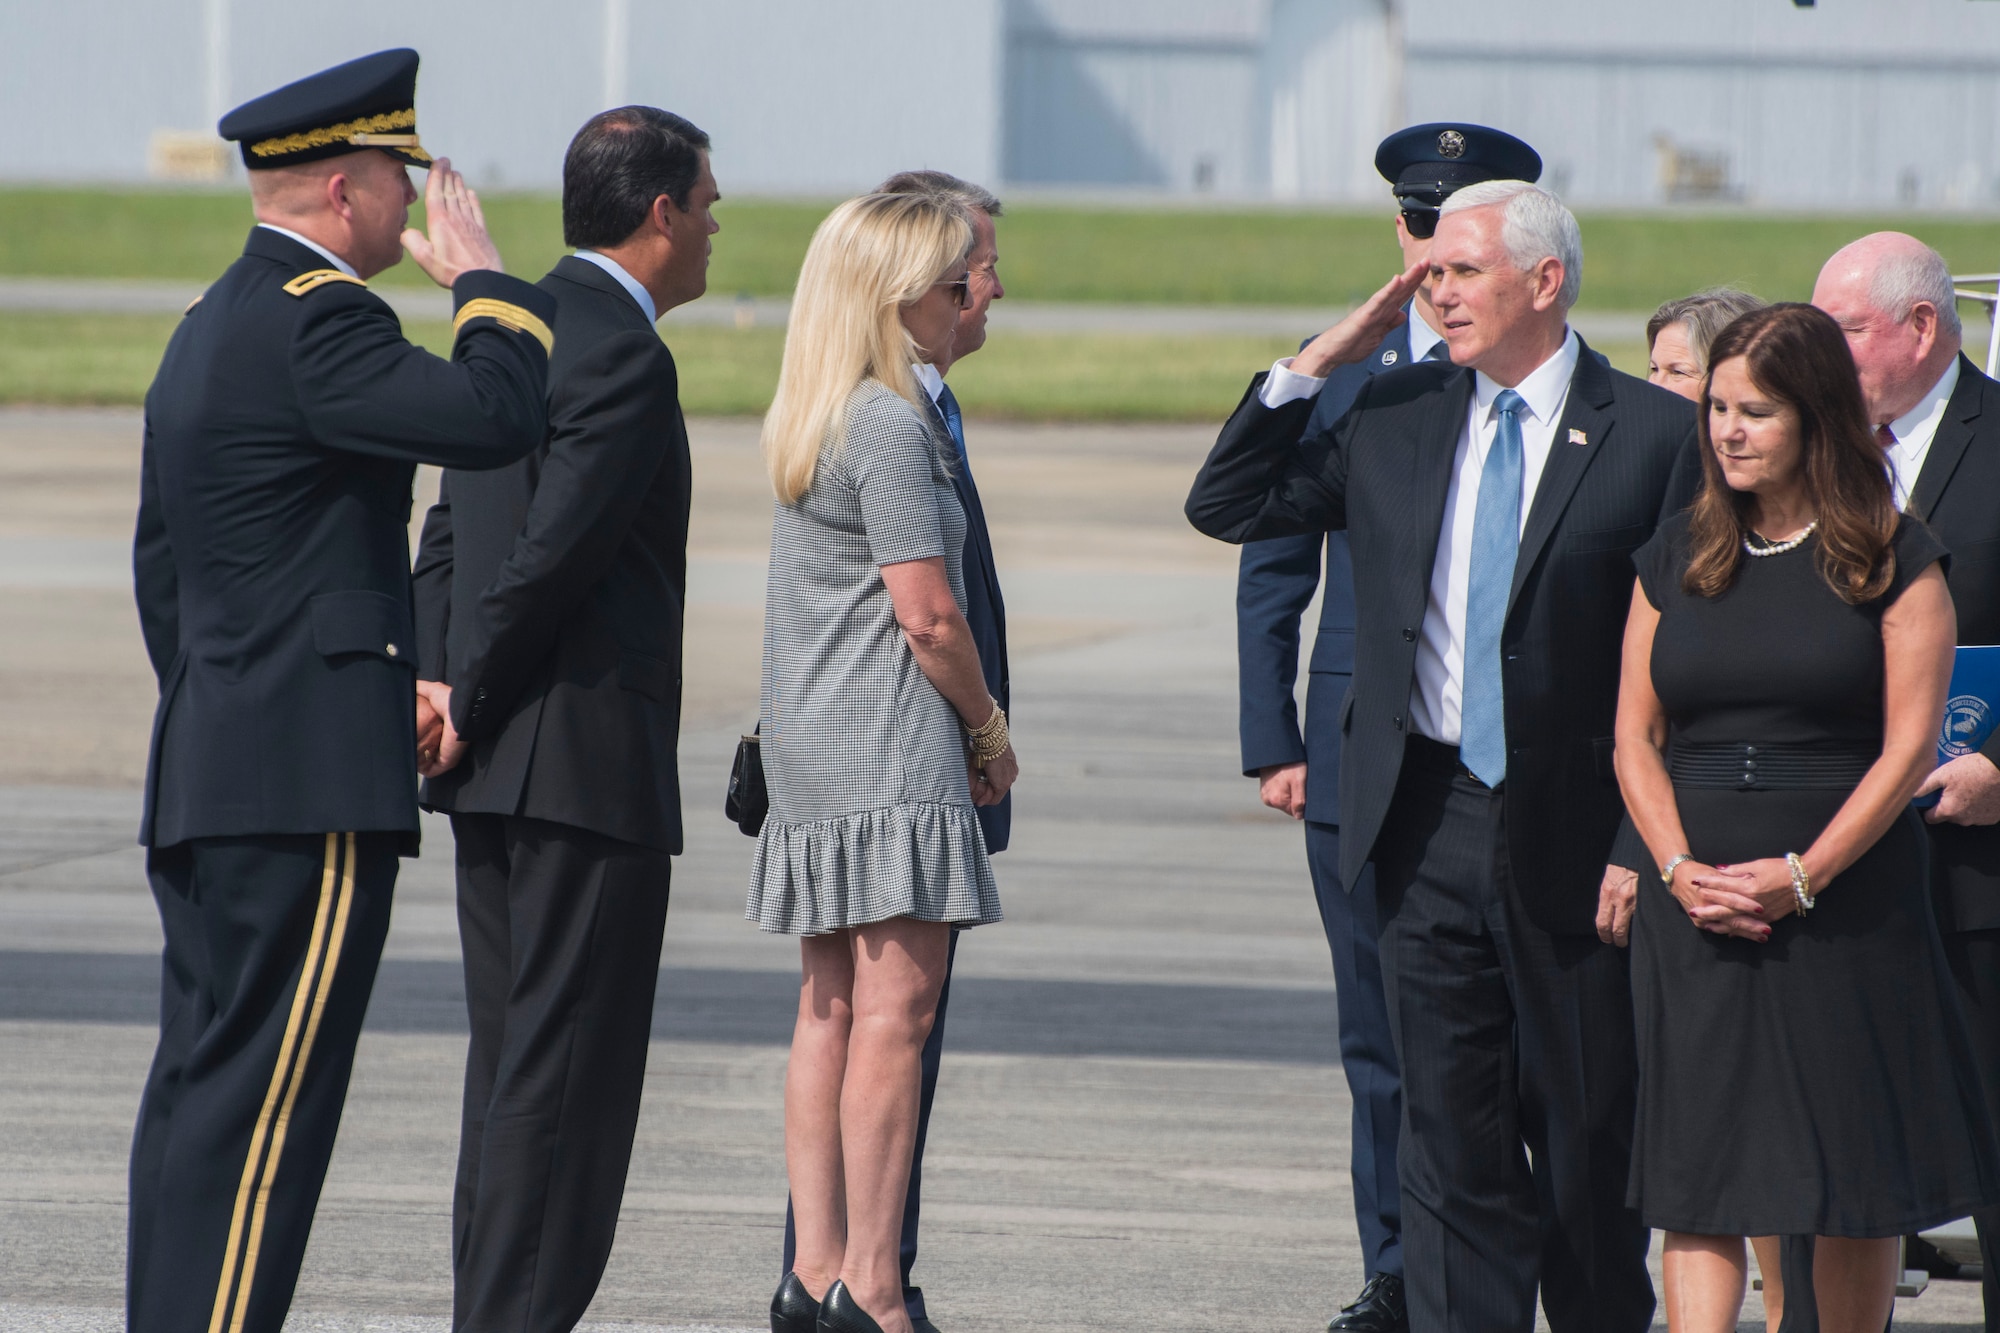 Maj. Gen. Thomas Carden, The Adjutant General of the Georgia Department of Defense, salutes Vice President Michael Pence, at Dobbins Air Reserve Base, Ga. on May 29, 2020. Air Force Two landed here around 10 a.m., where the vice president was greeted by Georgia Gov. Brian Kemp and his wife, Marty; Georgia Lt. Gov. Geoff Duncan; and Carden. (U.S. Air Force photo/Andrew Park)